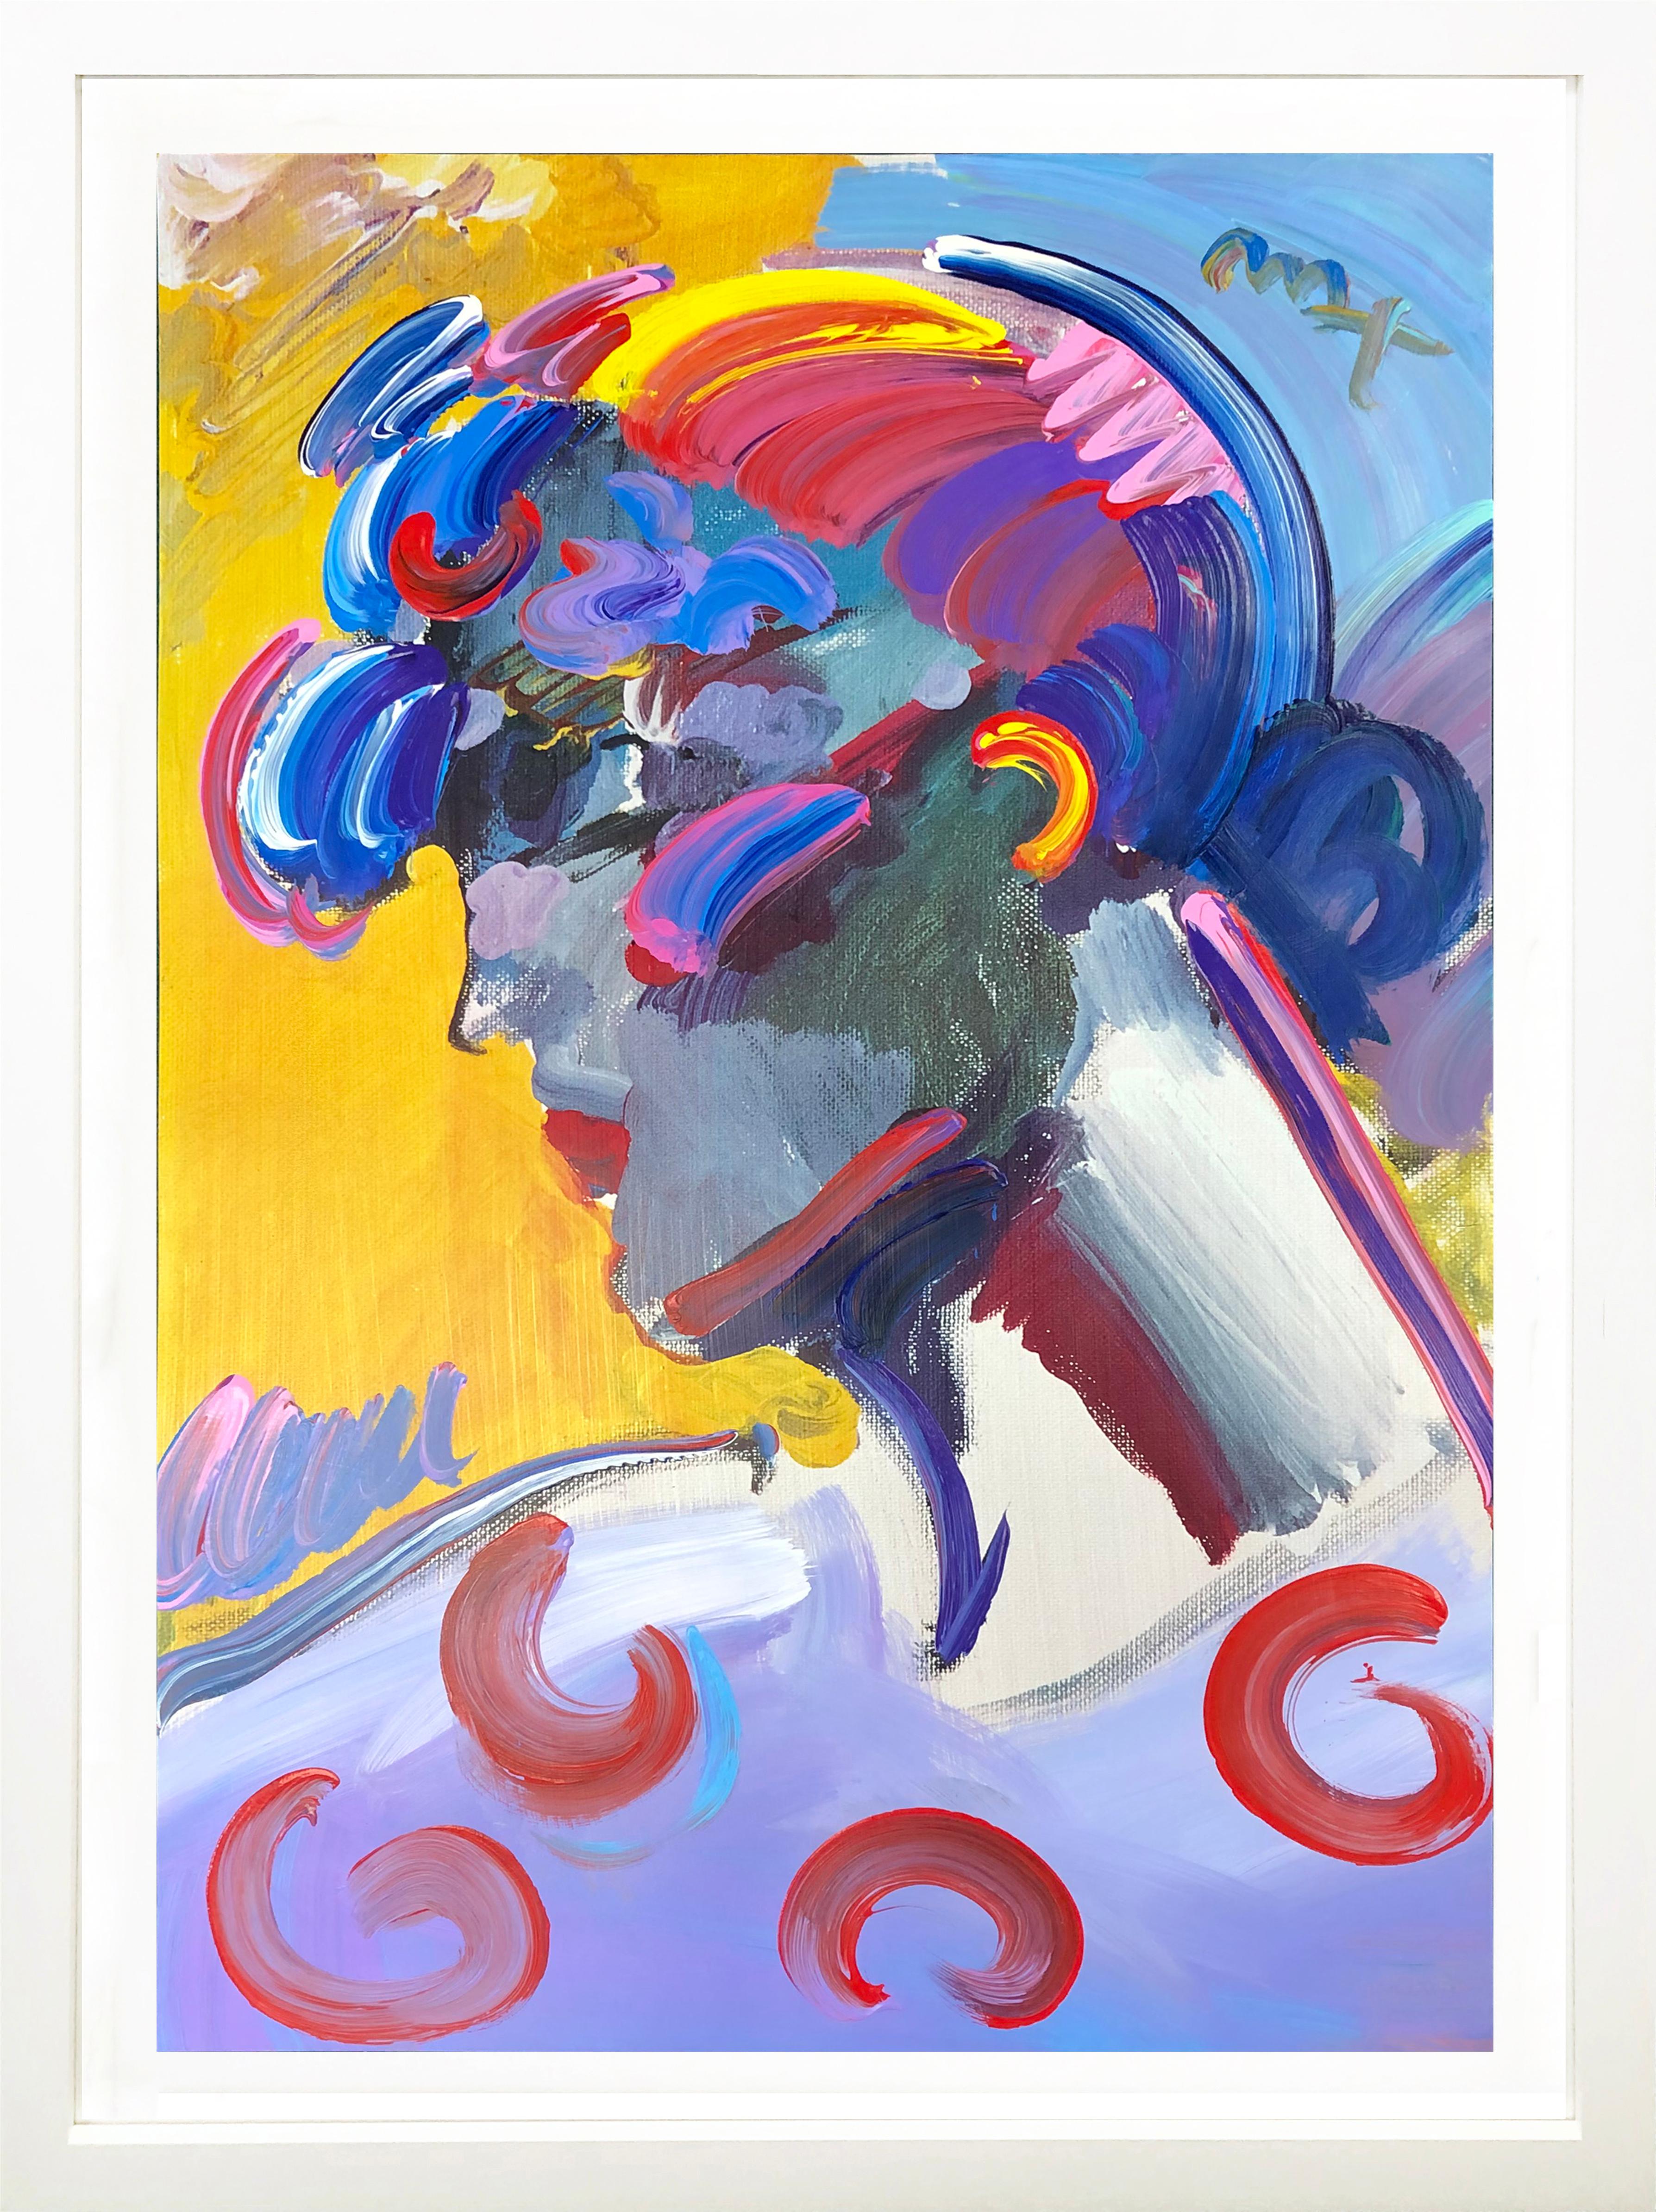 Figurative Painting Peter Max - PALM BEACH LADY - Robe de chambre